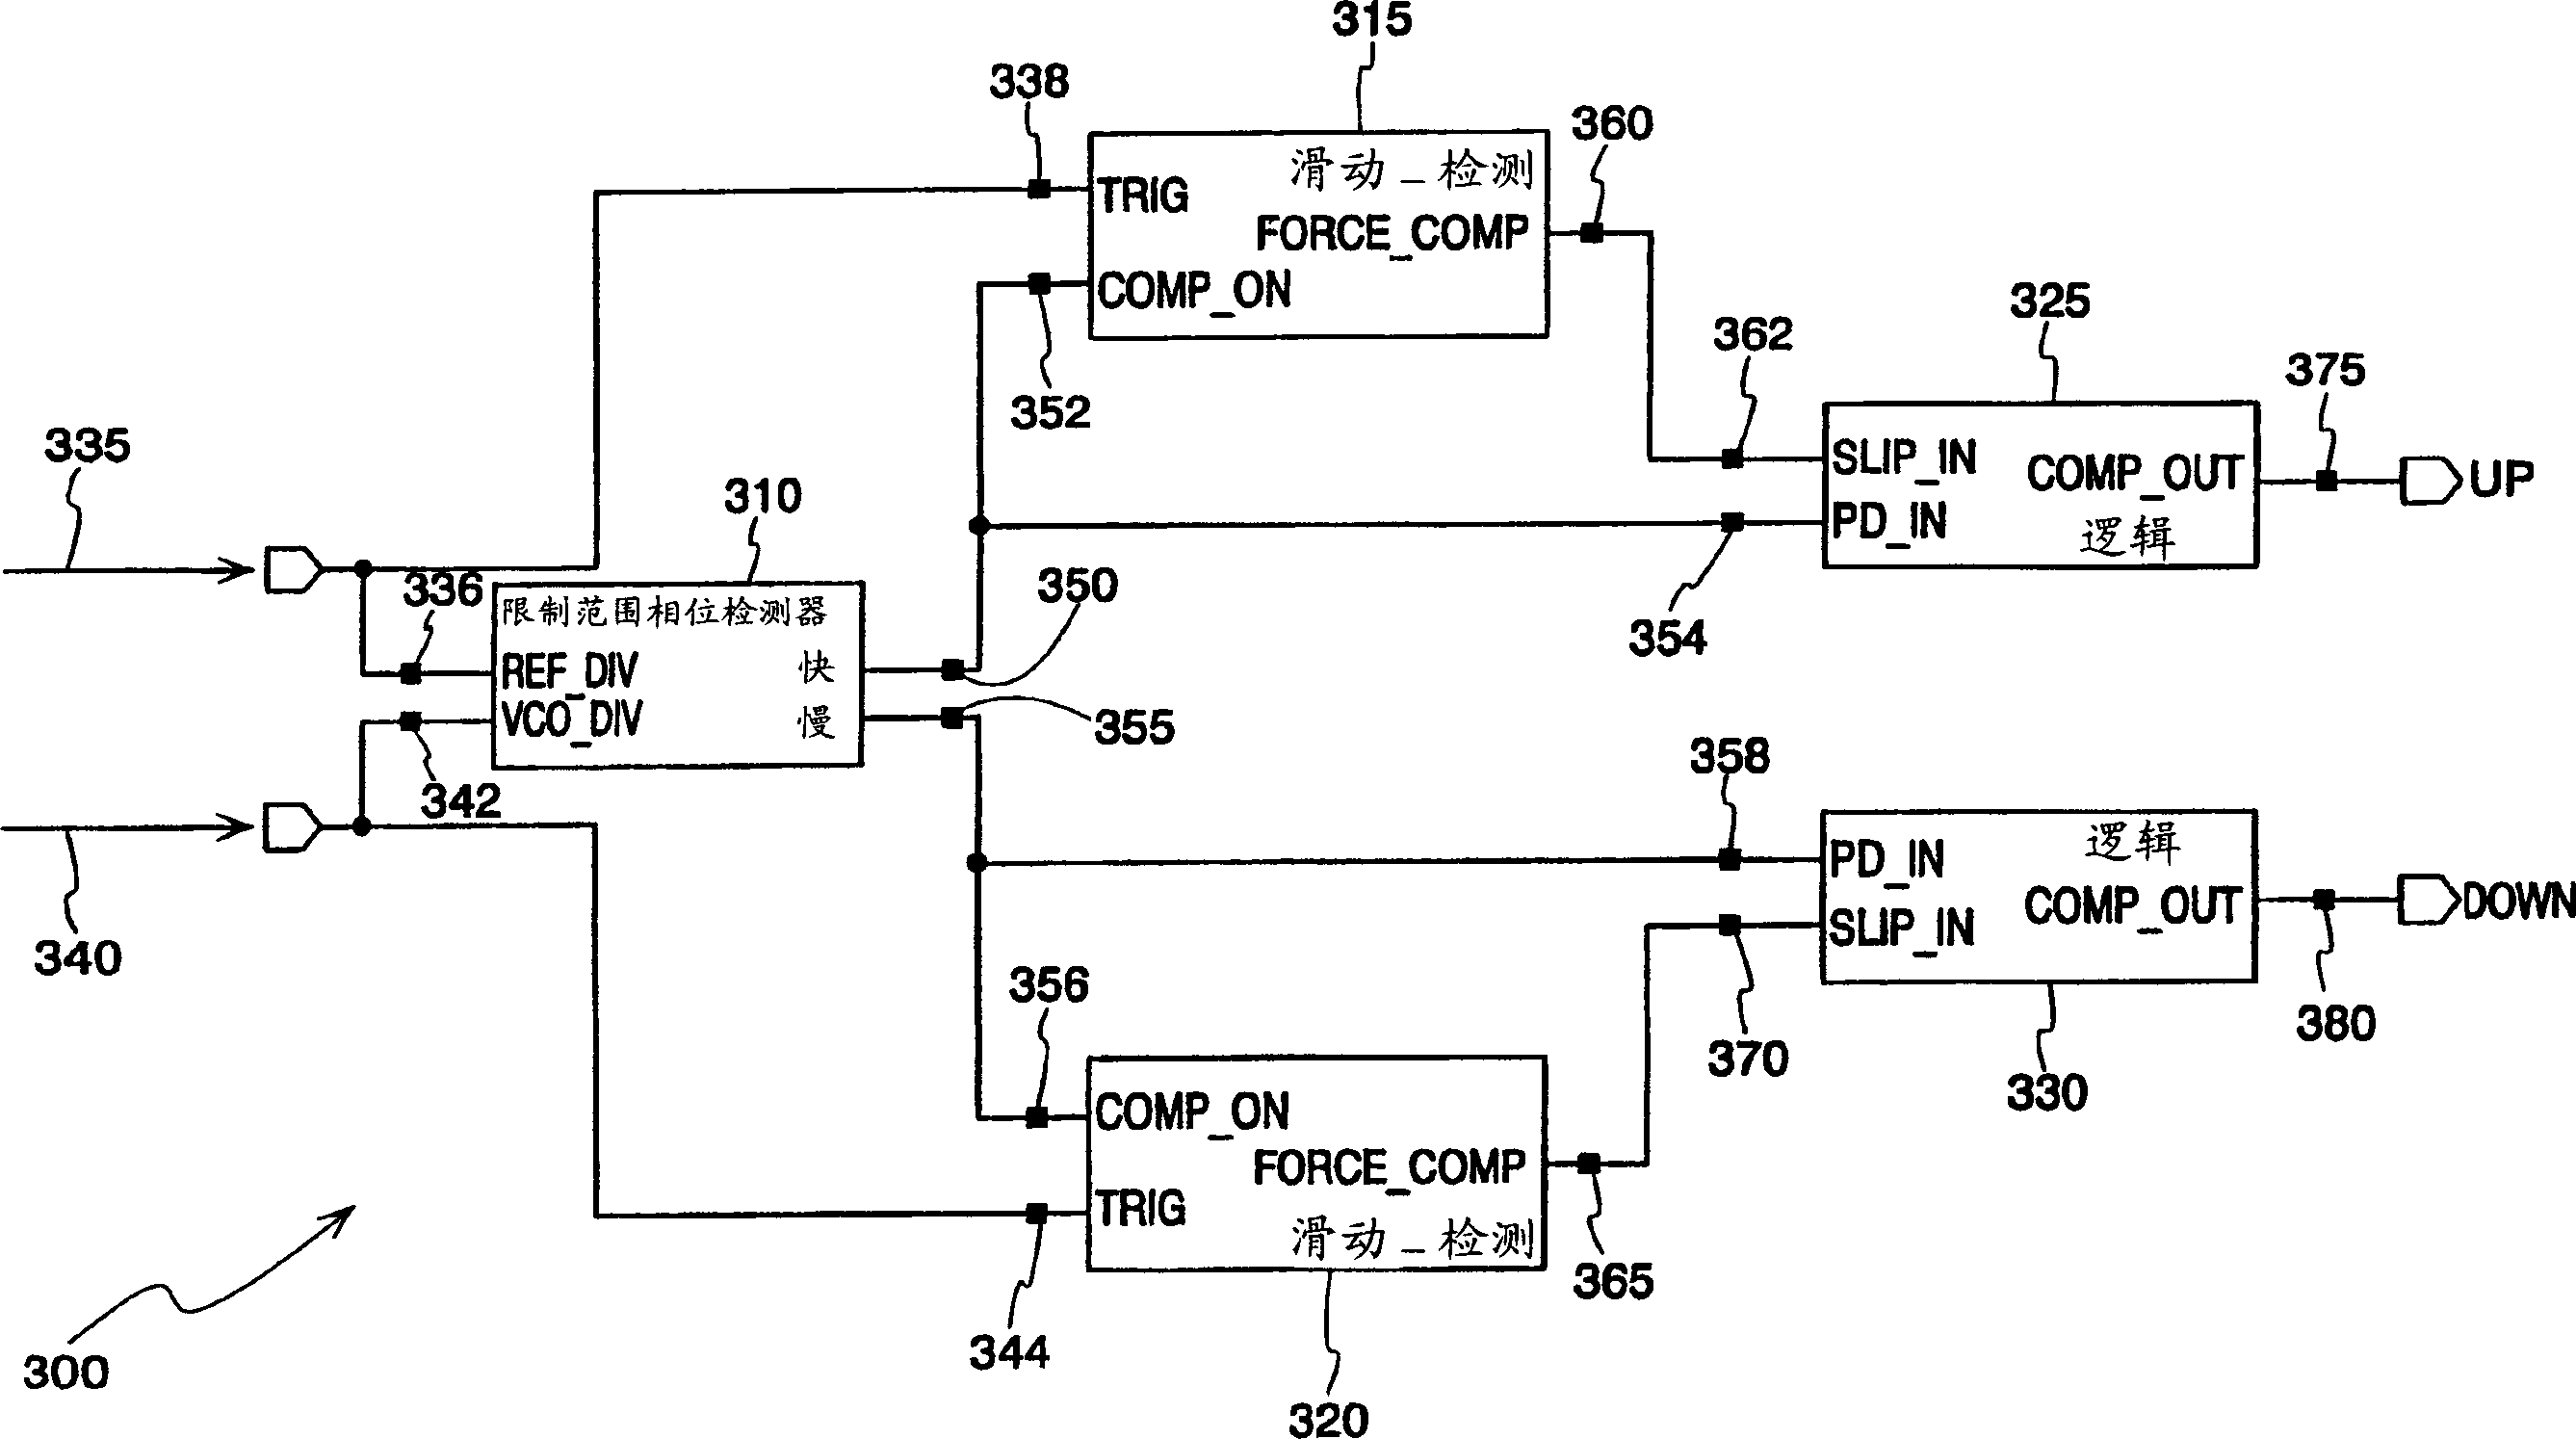 Slip-detecting phase detector and method for improving phase-lock loop lock time